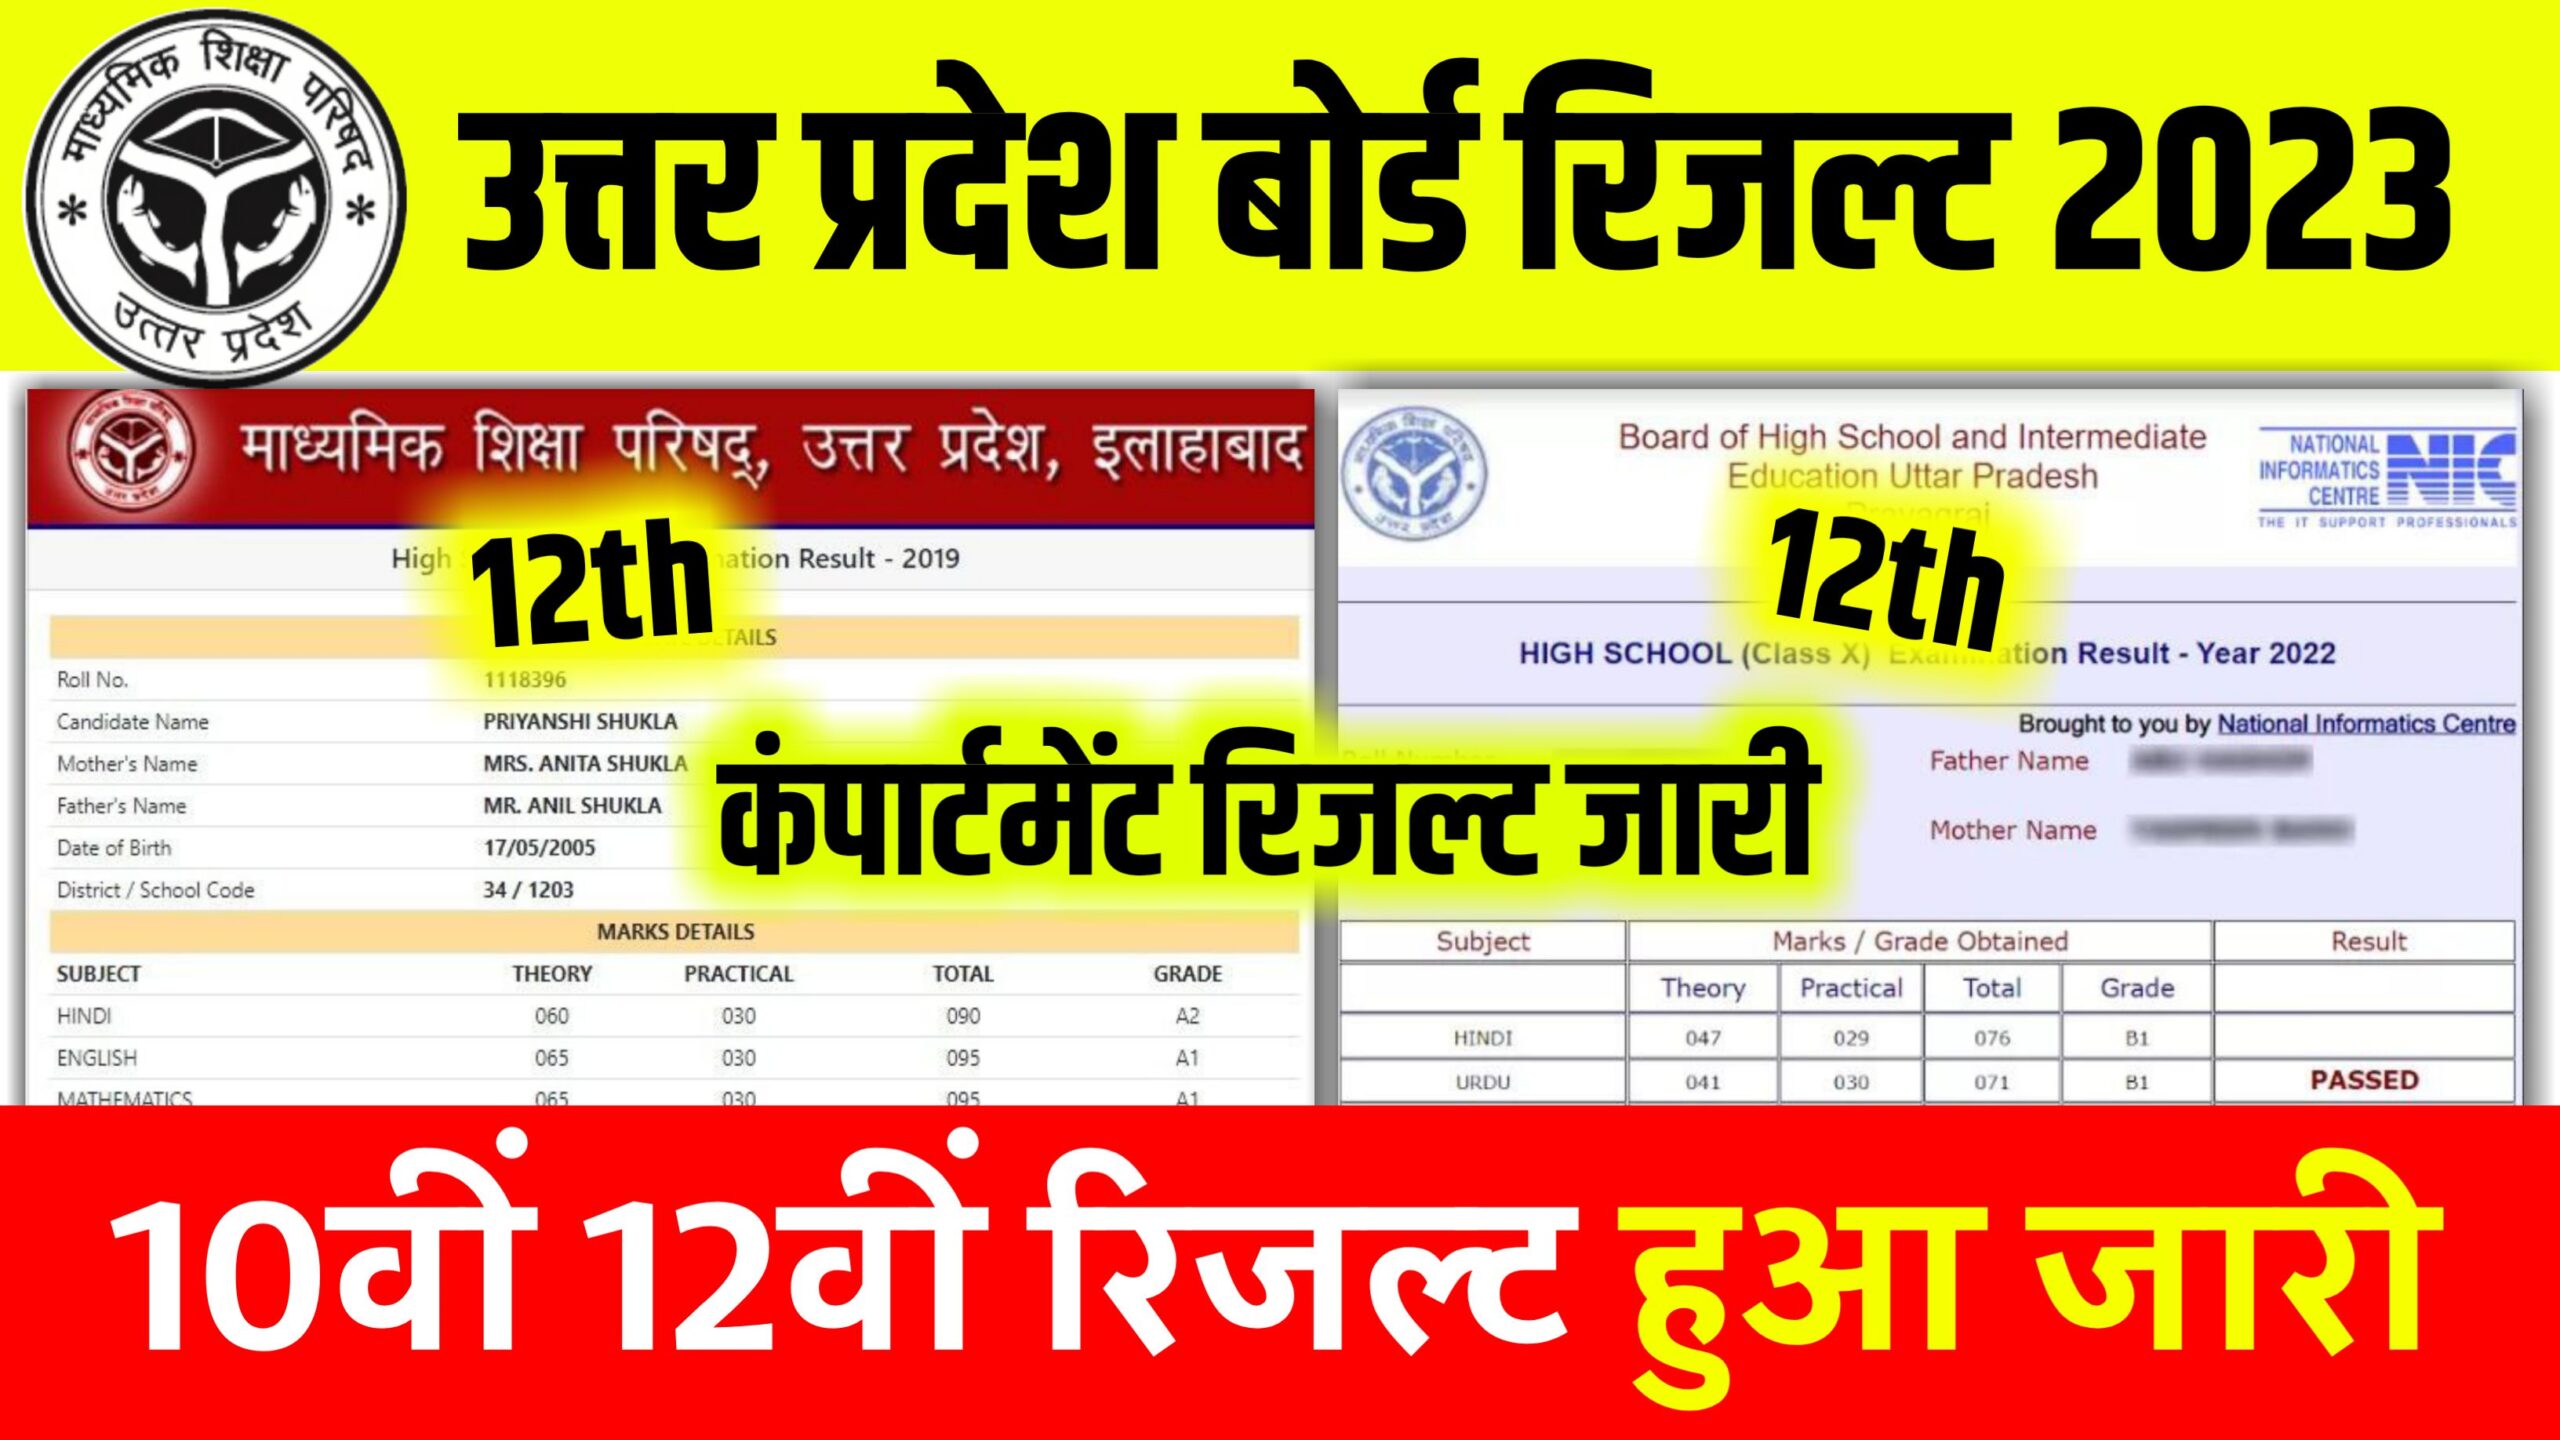 UPMSP Compartment Result Publish 10th 12th: